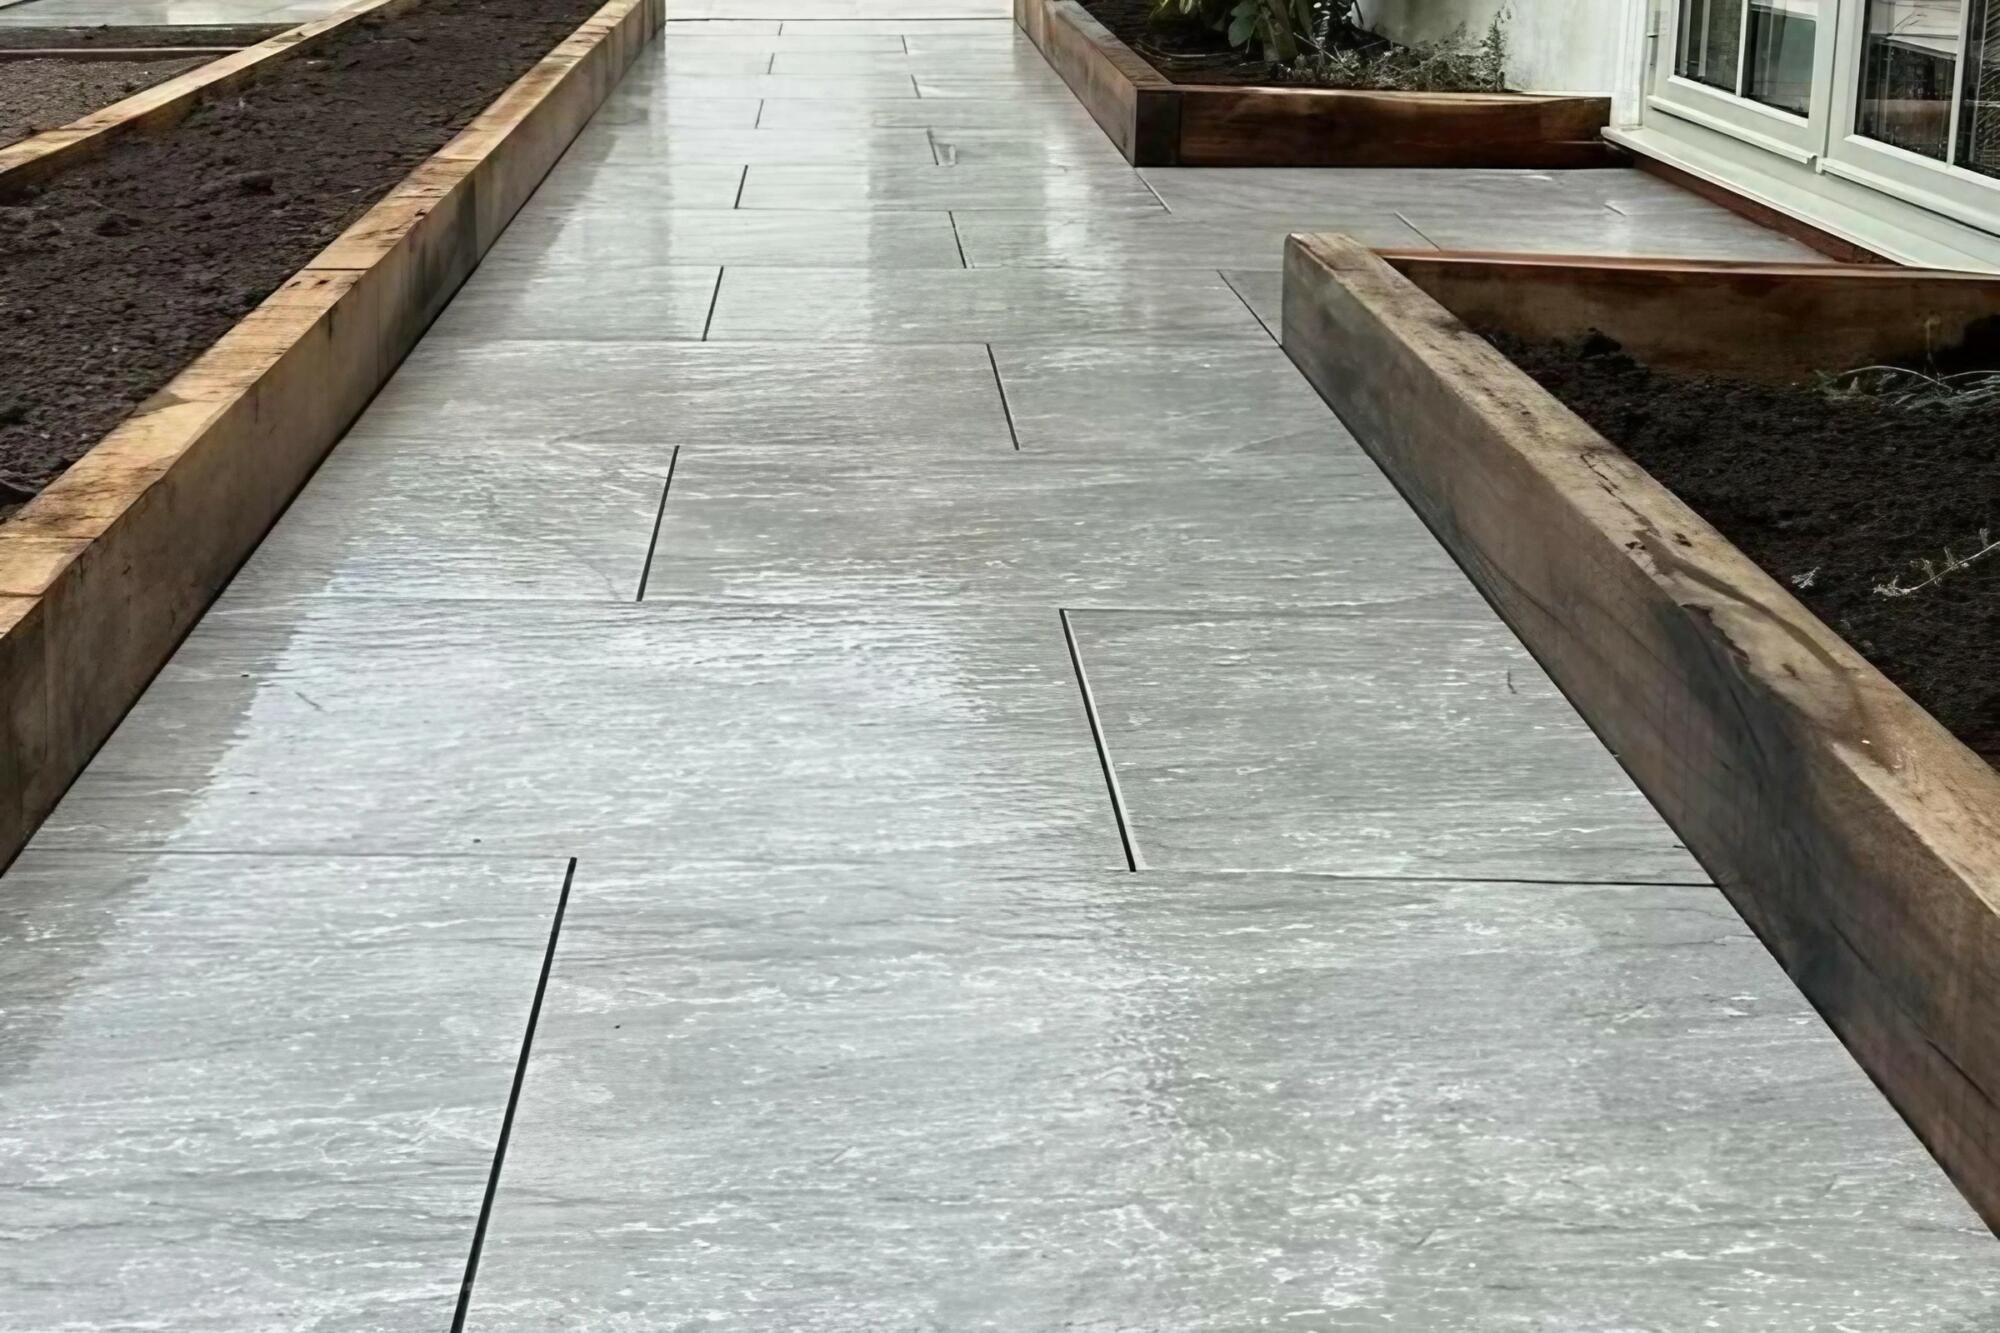 Garden pathway with wooden borders and tiled surface.